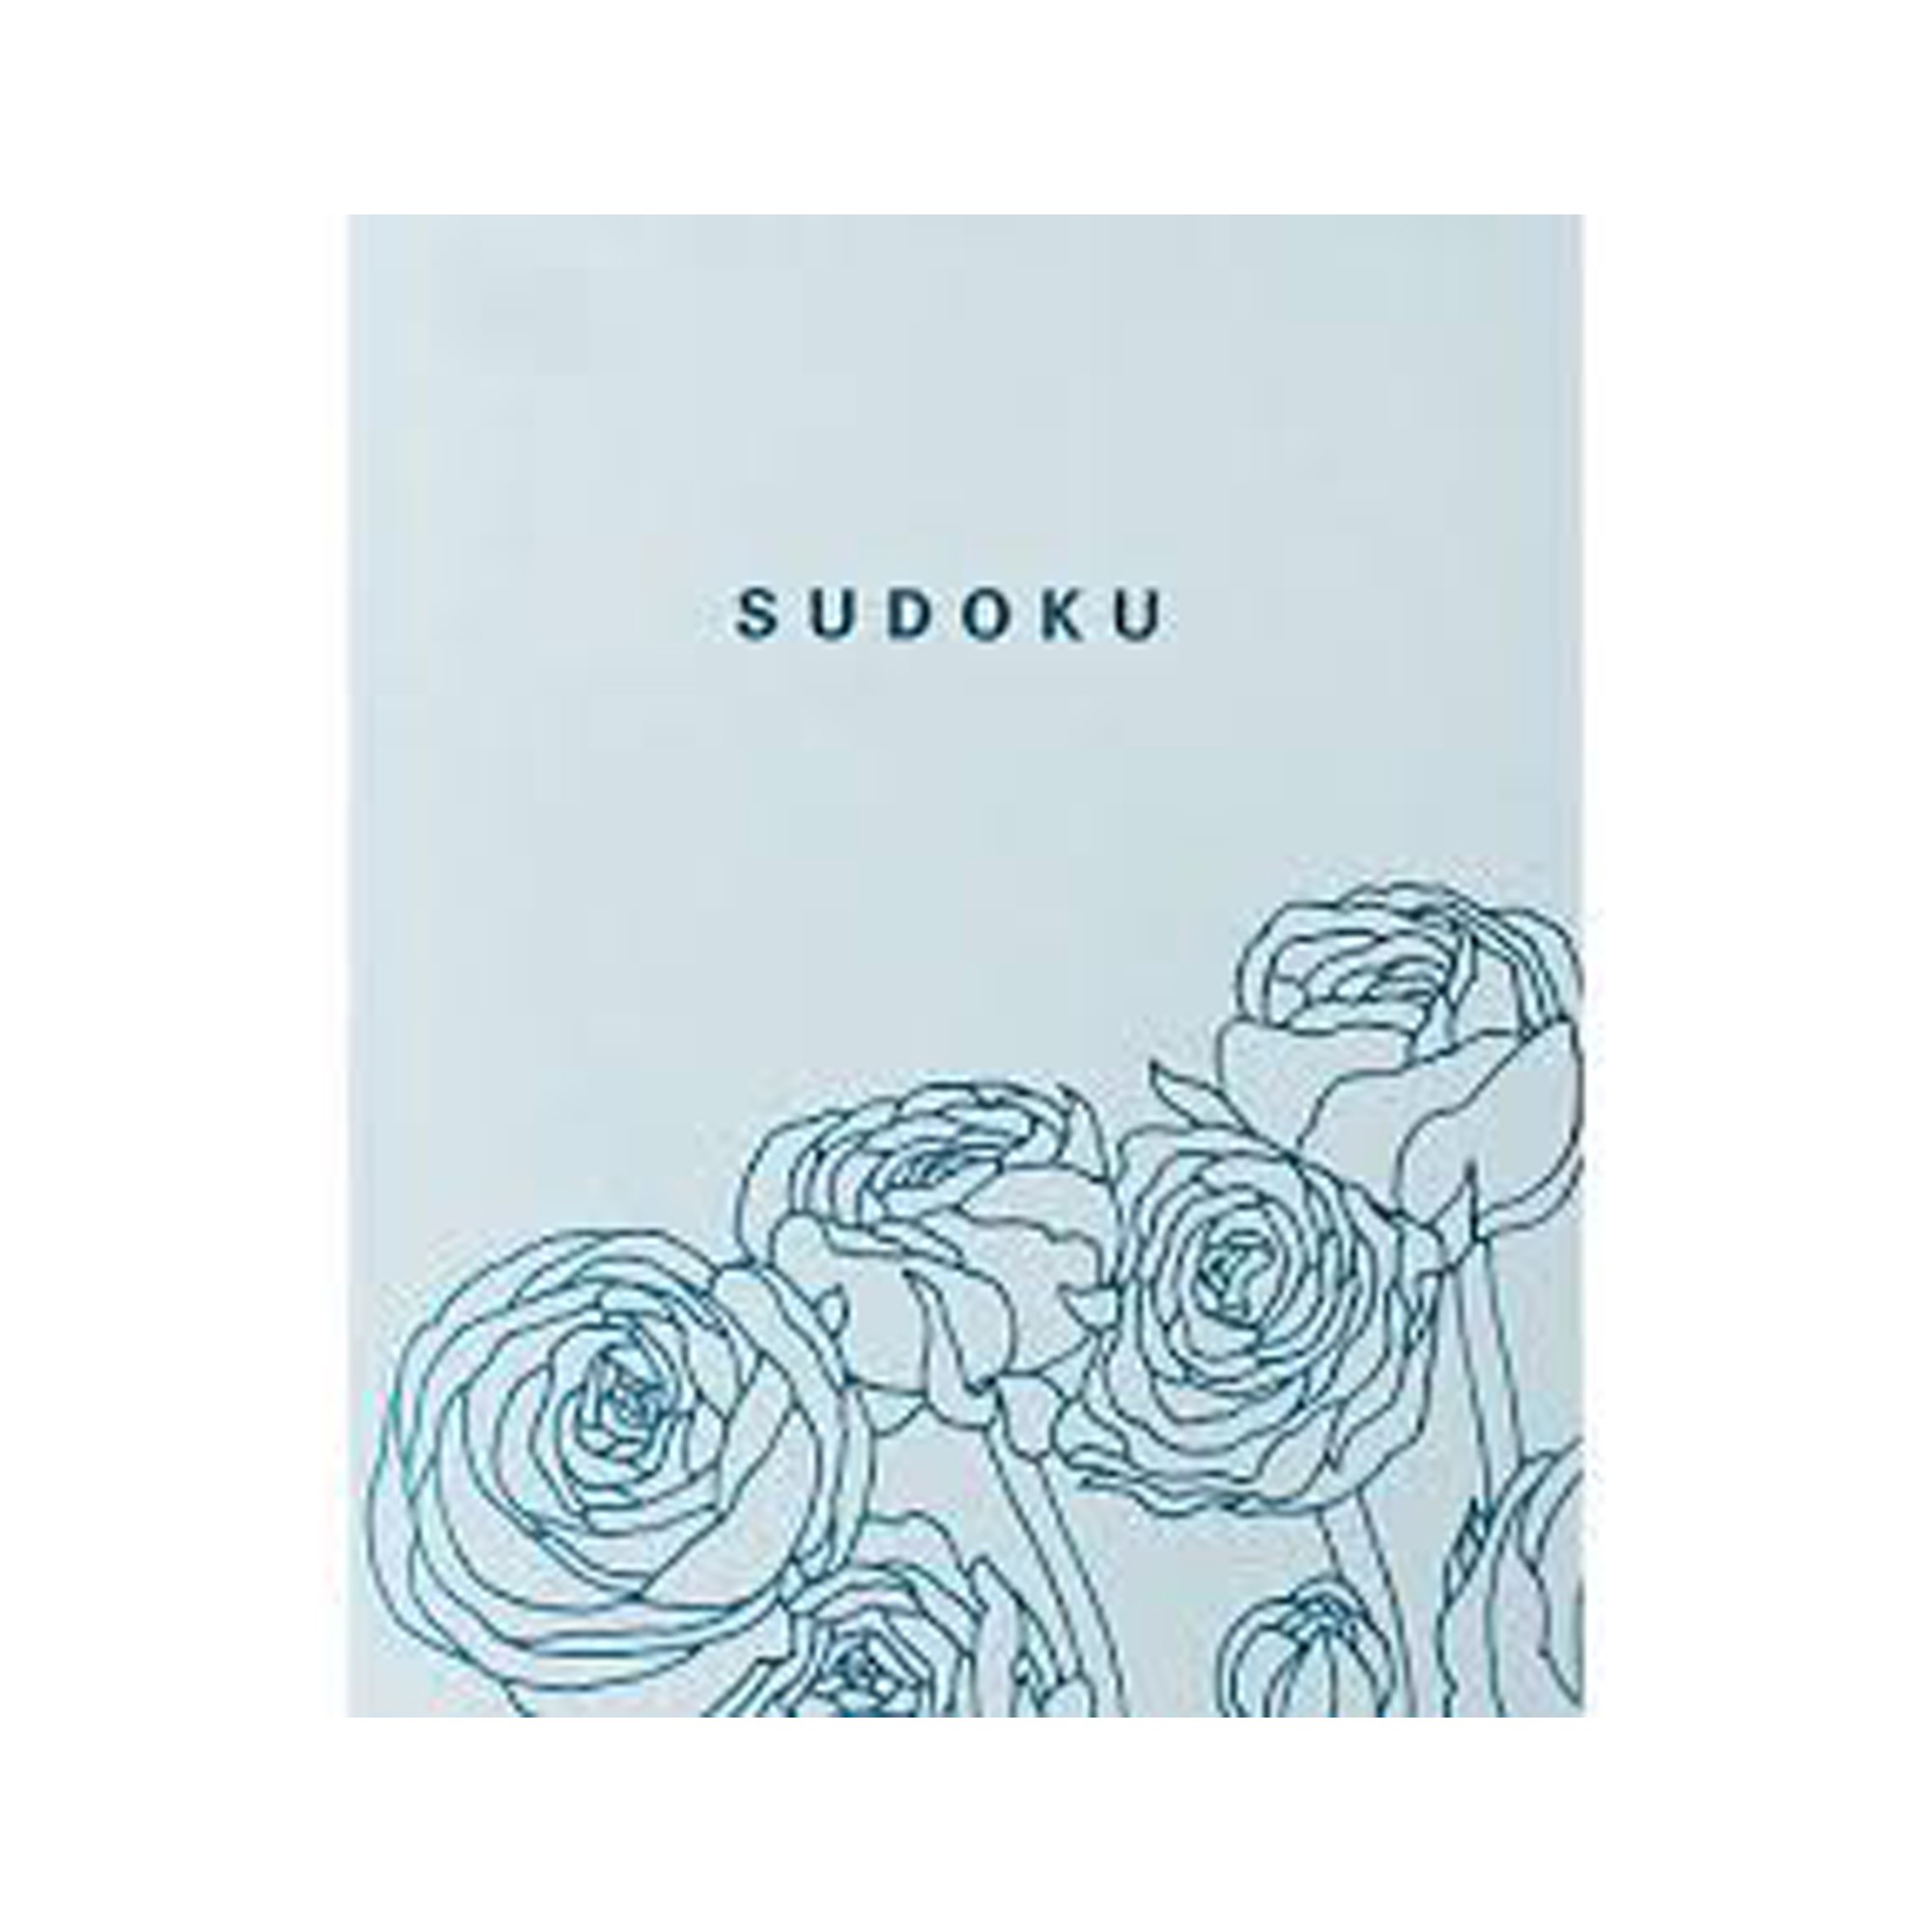 Involved Meal panel Sudoku Pantone Puzzle Book | Cancer Research UK Online Shop